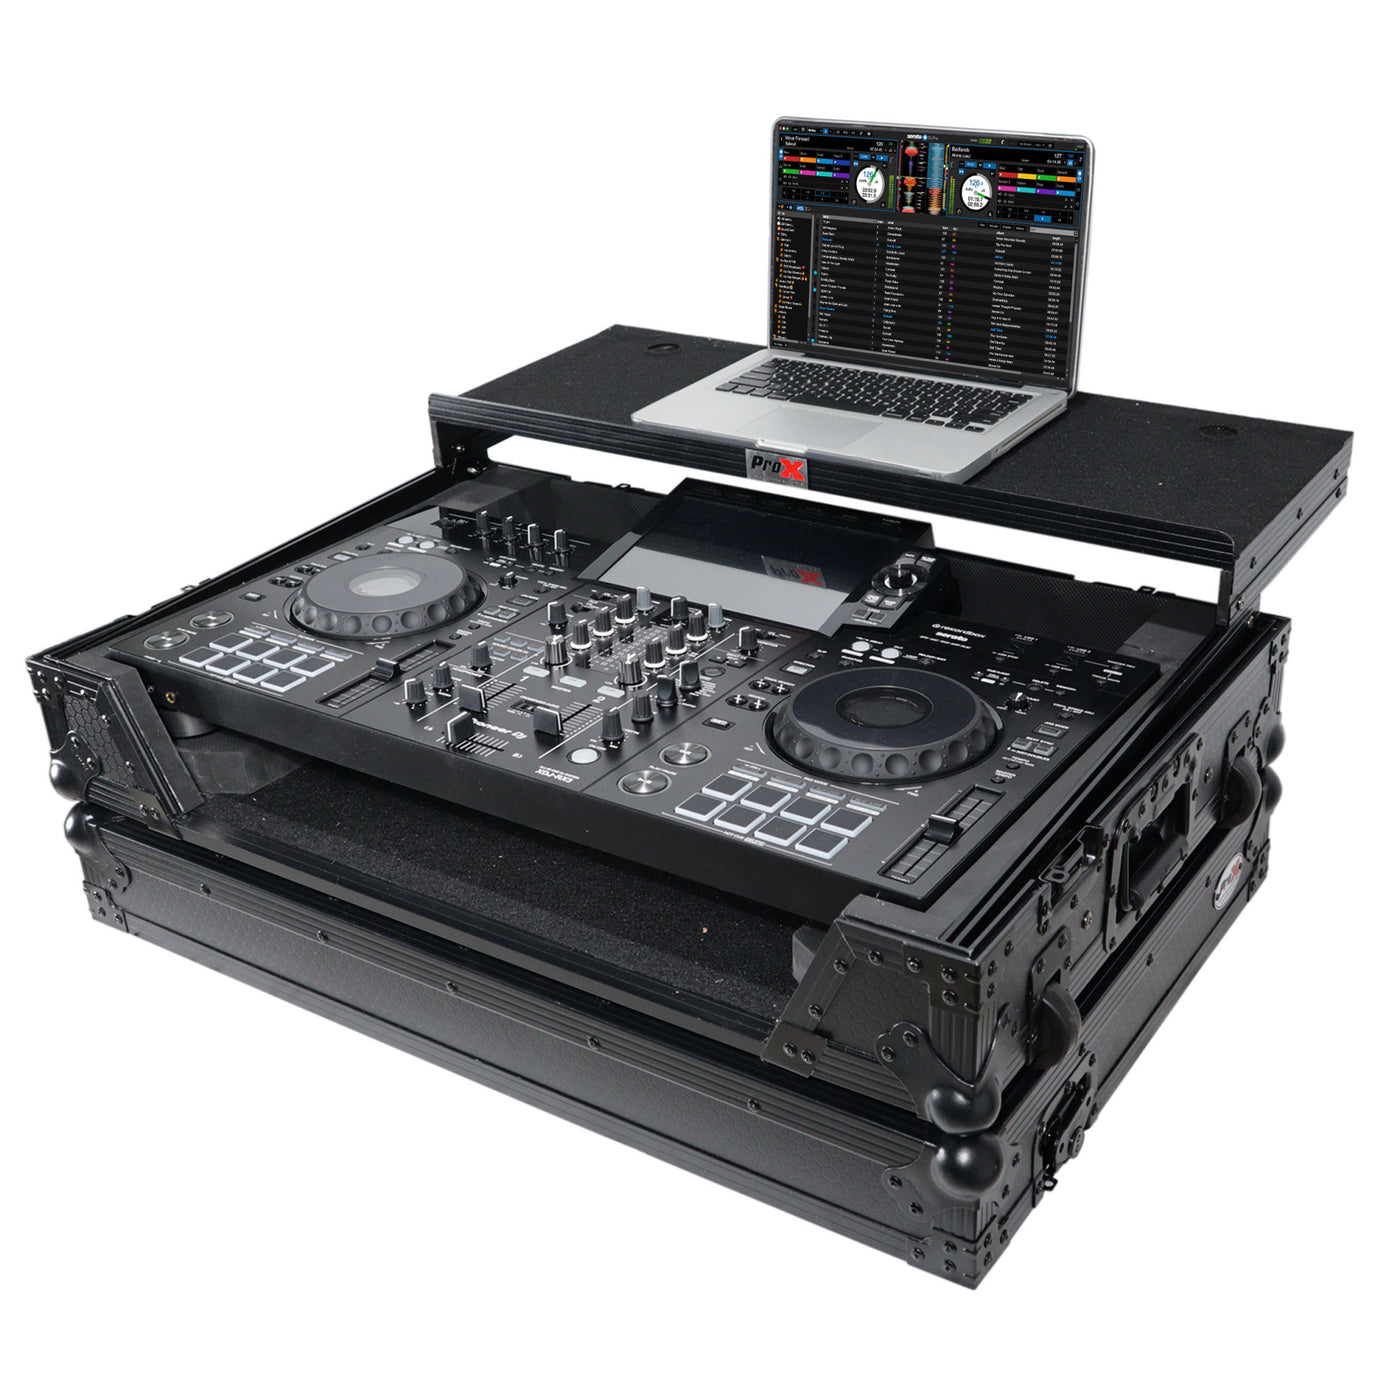 ProX XS-XDJRX3WLTBL ATA Style DJ Controller Case, For Pioneer XDJ-RX3 RX2 Case, With Laptop Shelf and Wheels, Pro Audio Equipment Storage, Black Finish